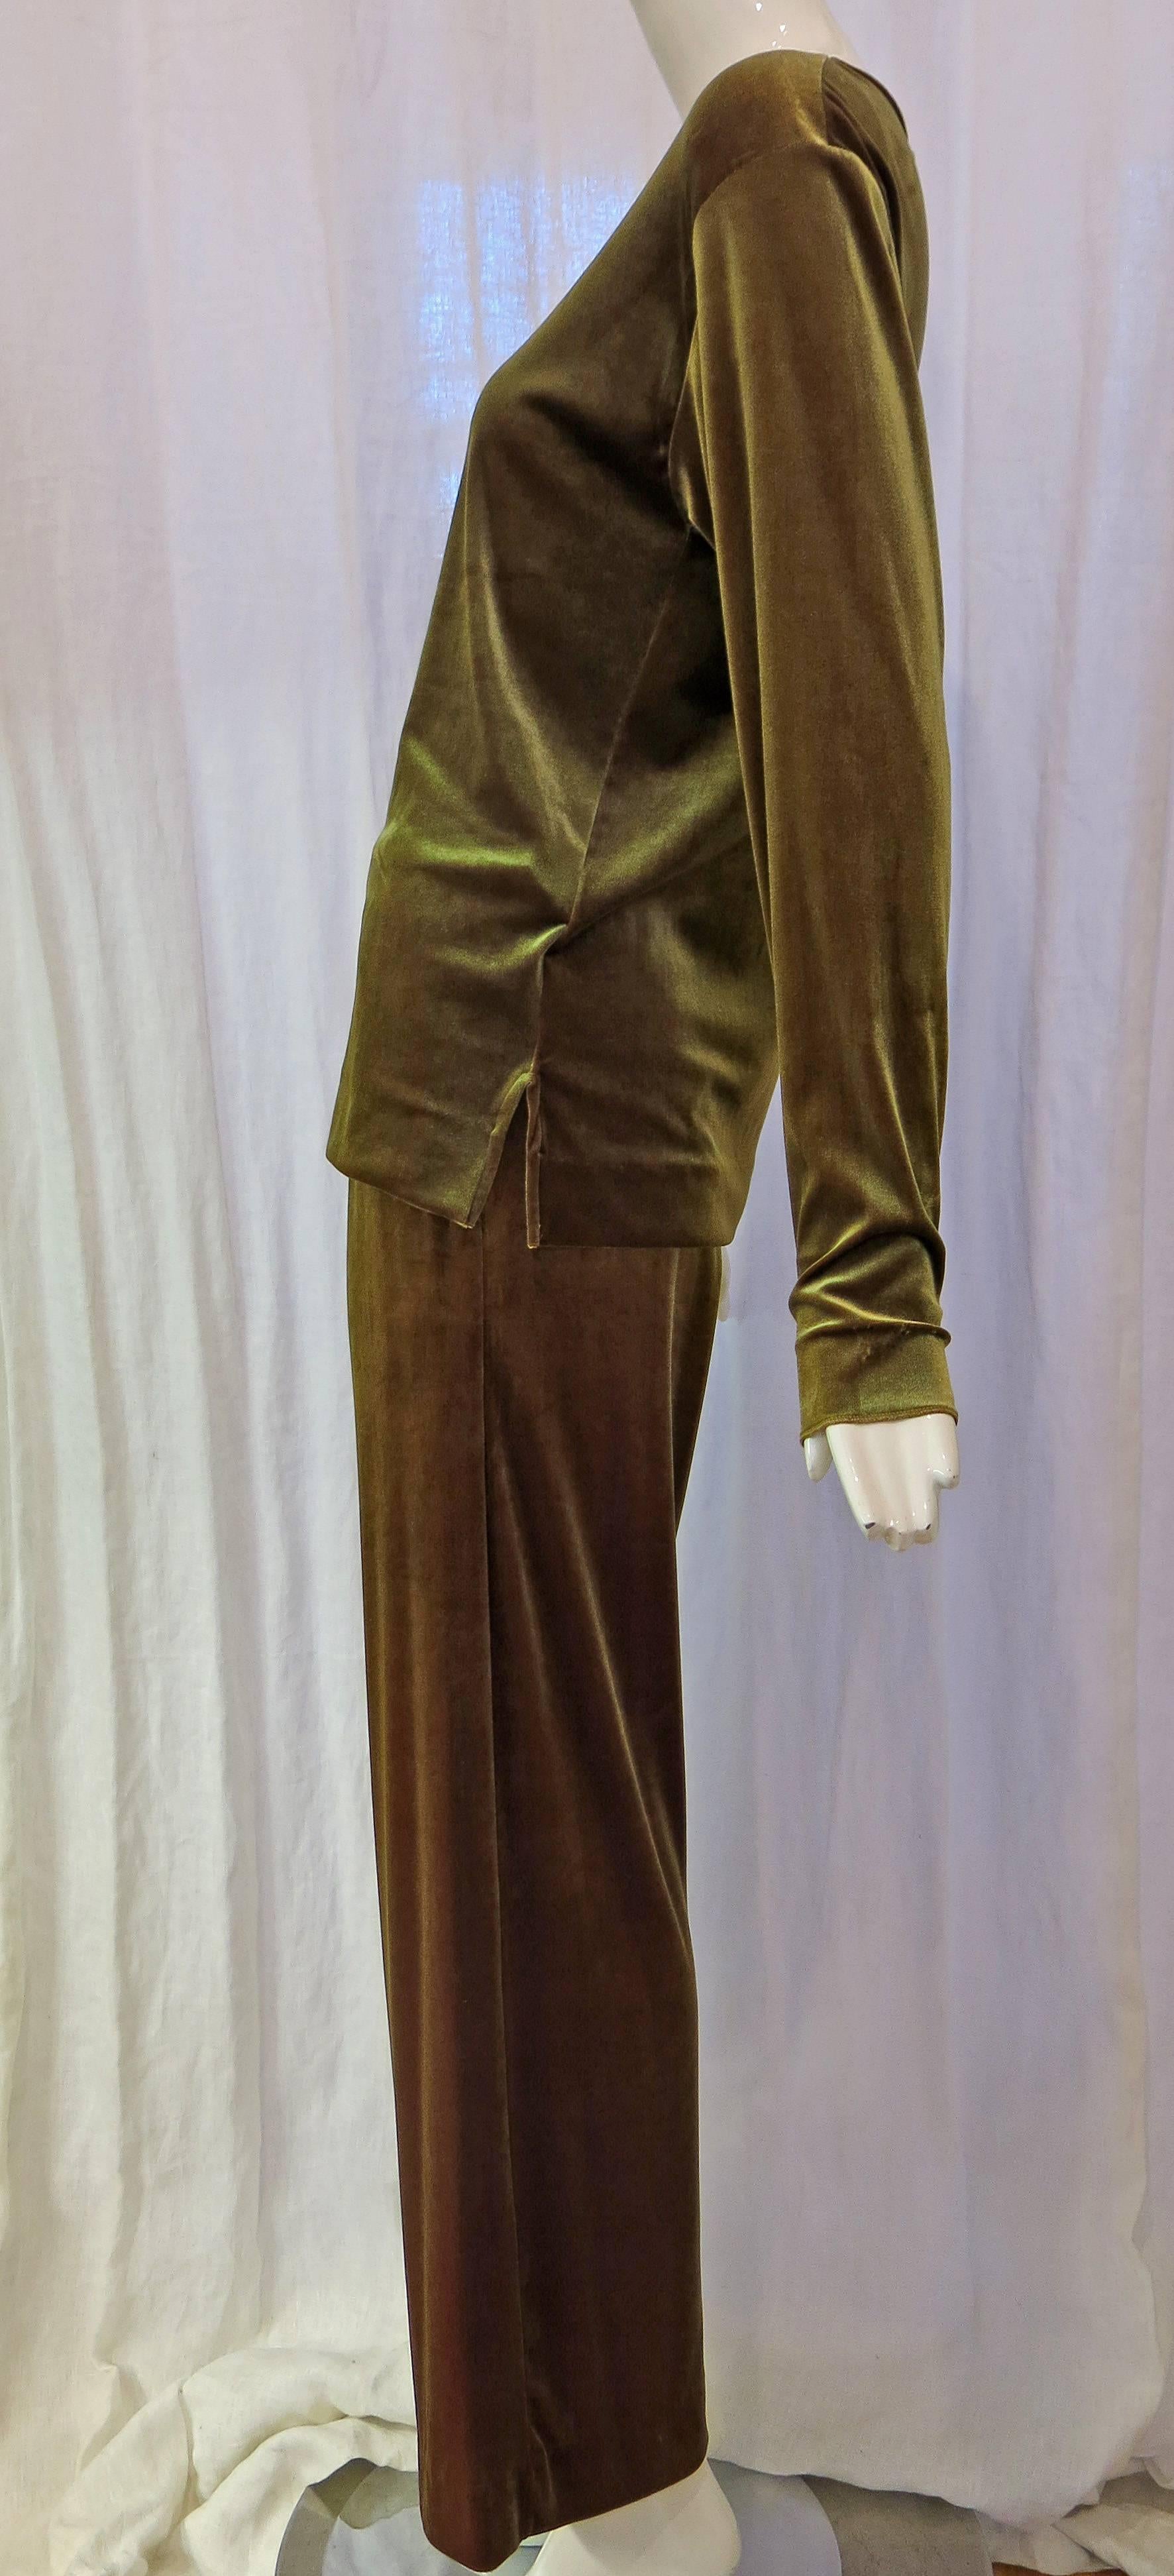 Matching iridescent green velvet top and bottom set from Joan Vass. Could be worn to relax at home or for a casual shopping day. Catches the light beautifully. Very comfy yet chic! Pants have pockets!

Joan Vass began as an editor of art books. She